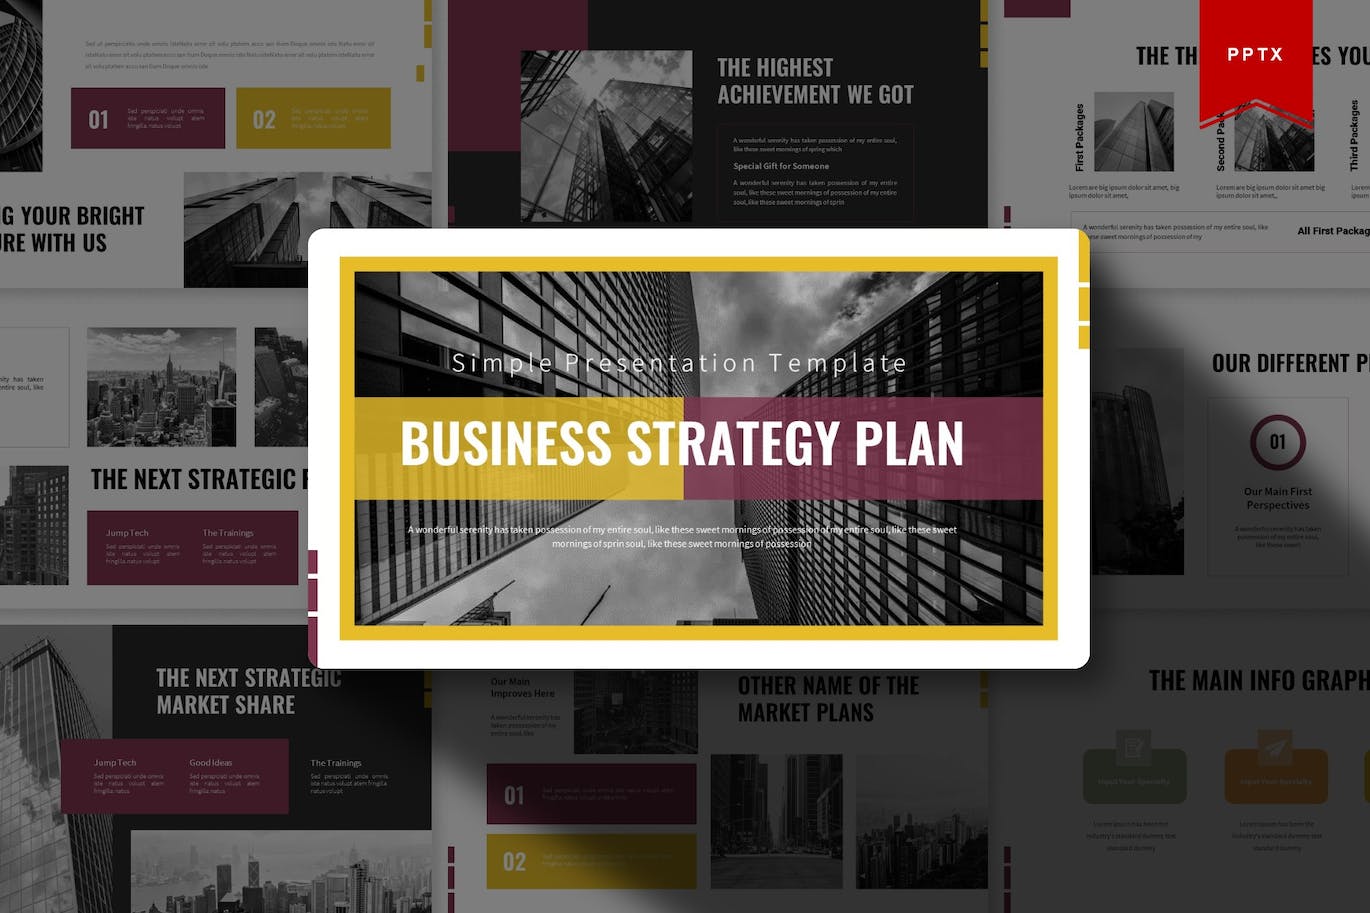 Pack of amazing business strategy plan presentation template slides.